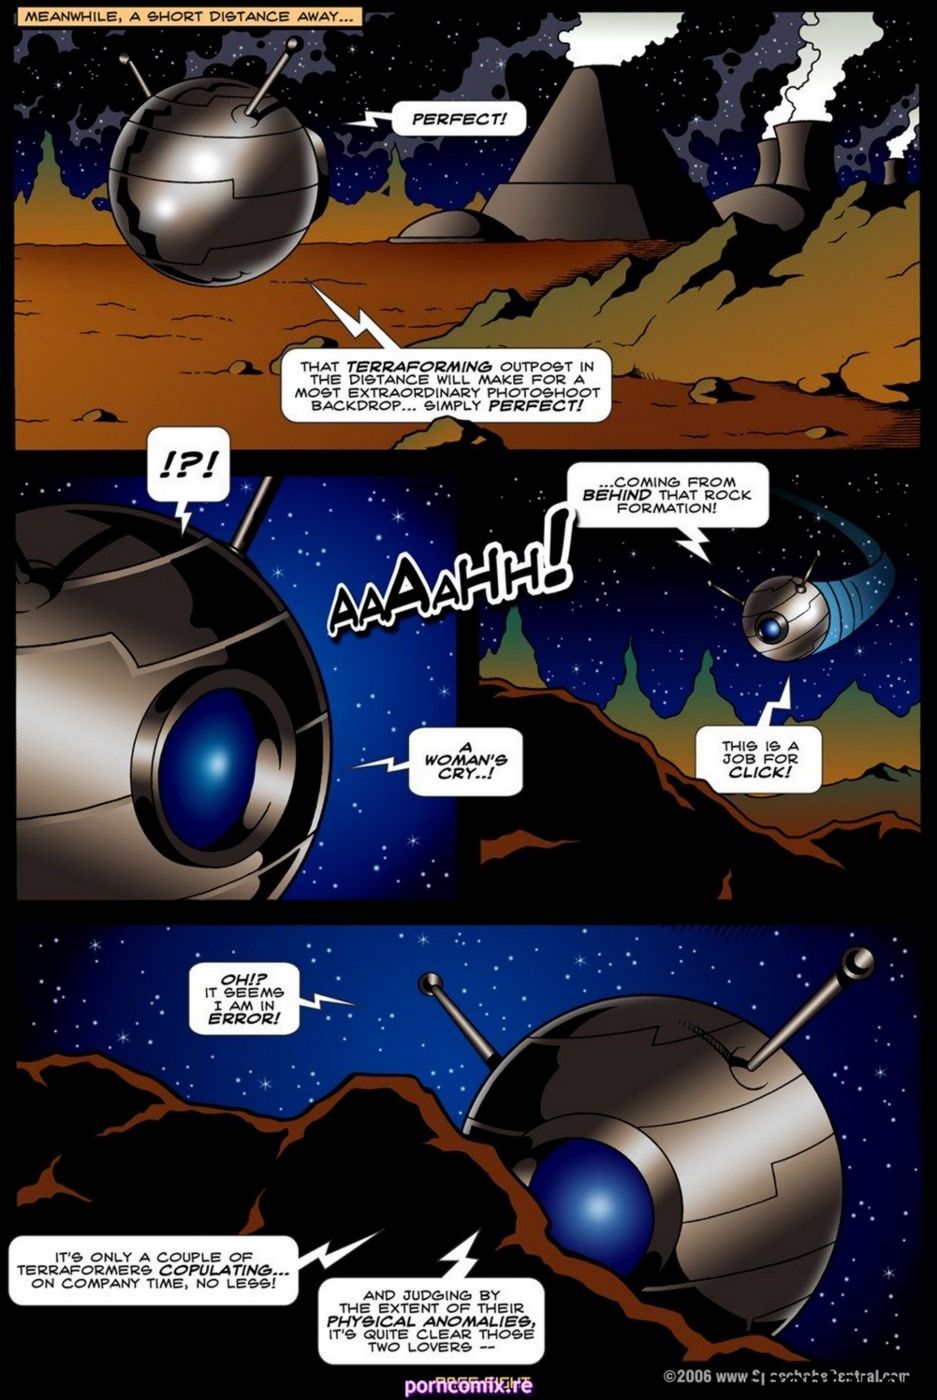 The Astro Vixen- James Lemay page 1